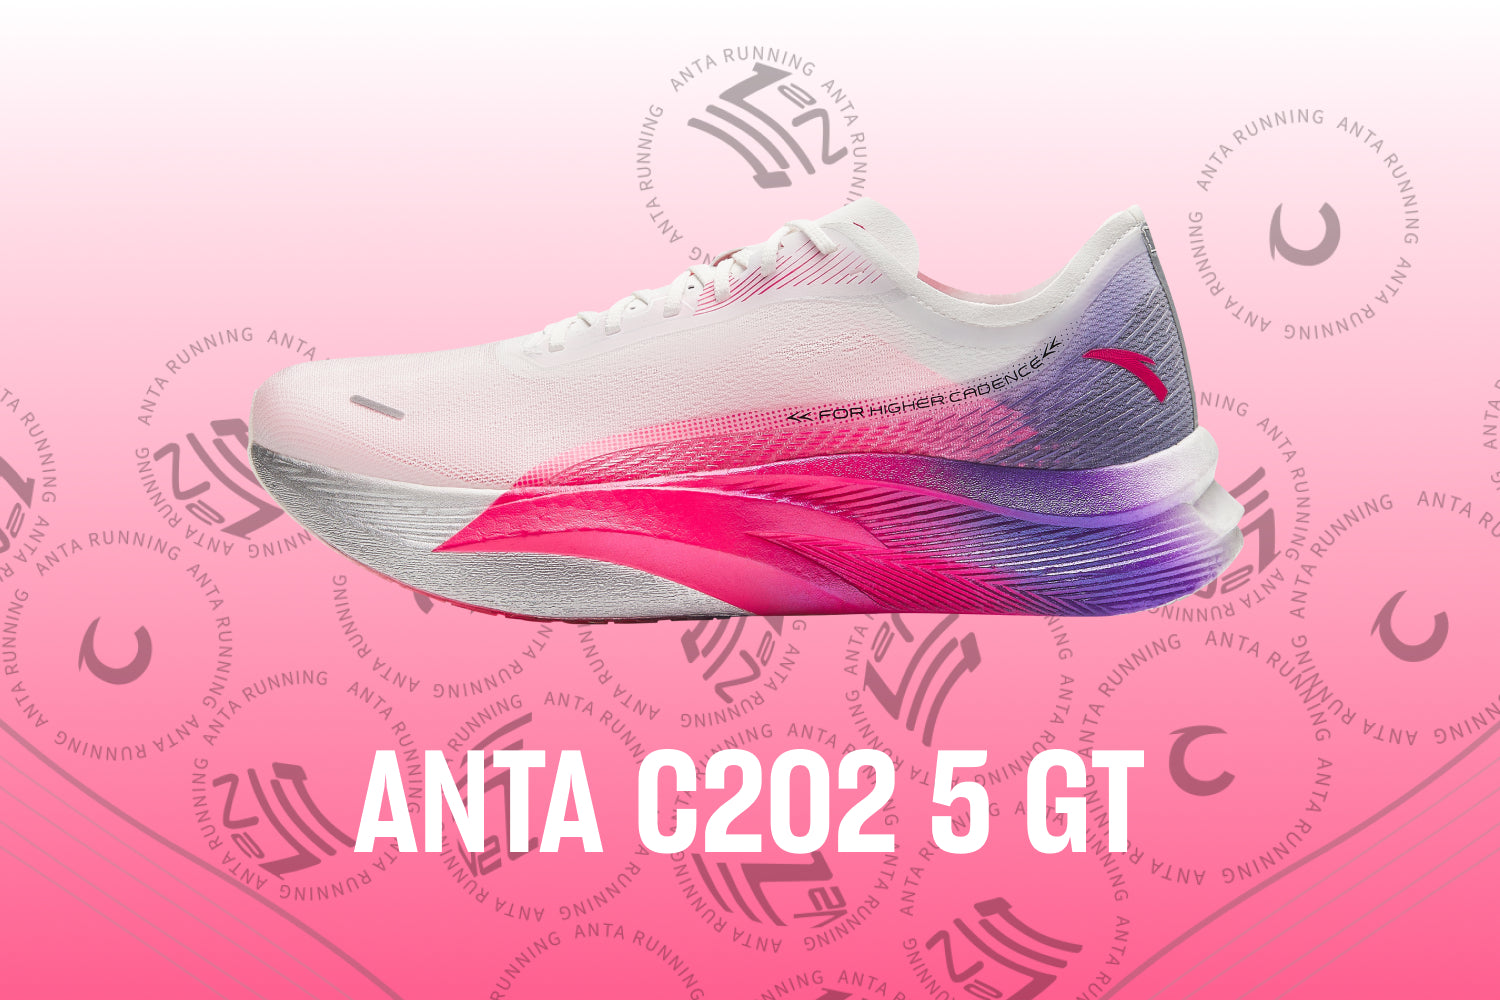 ANTA C202 5 GT Race Running Shoes